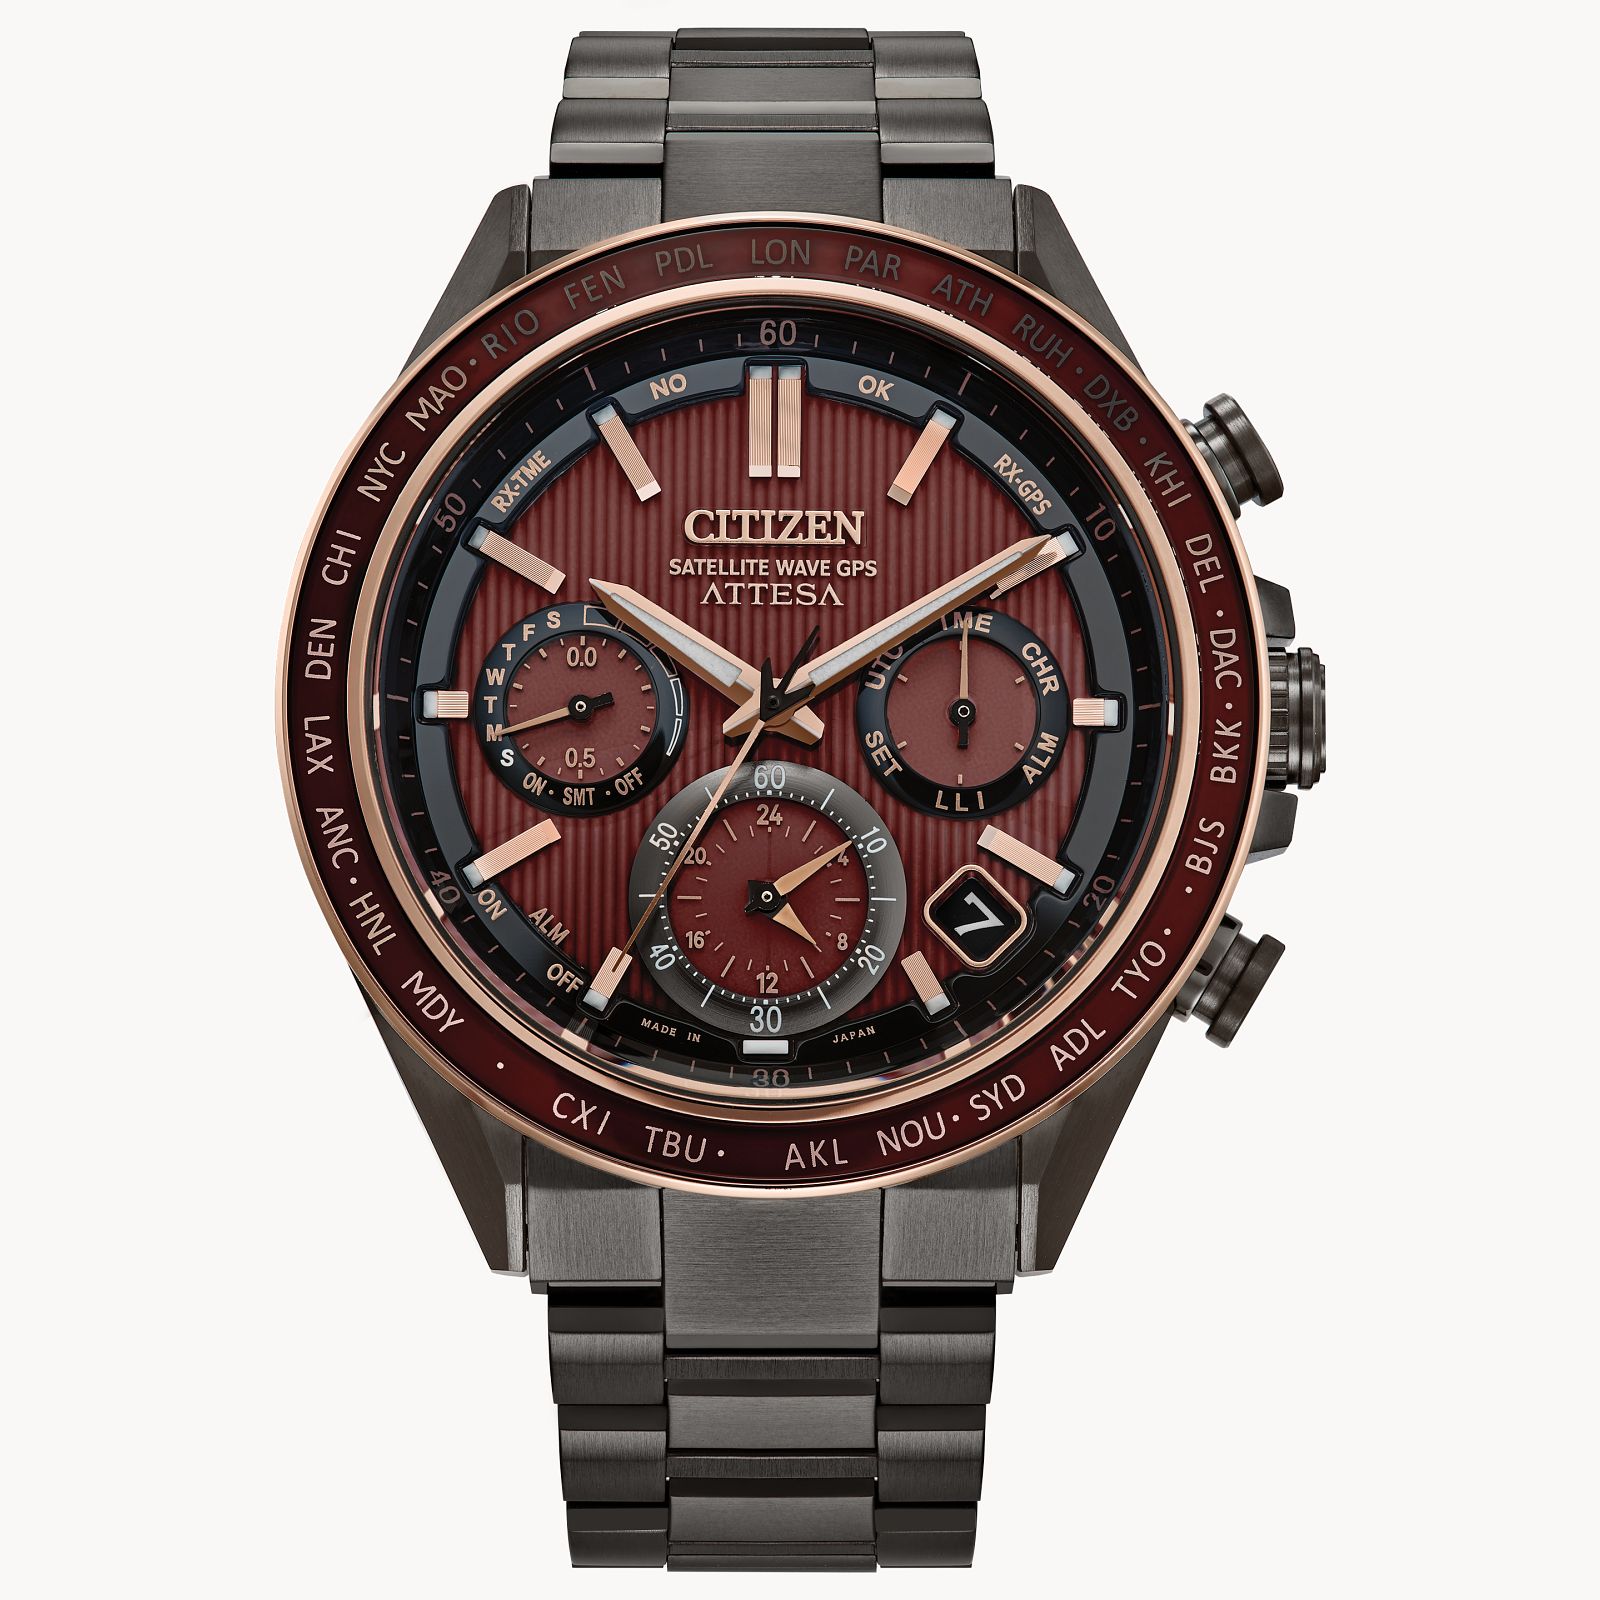 Citizen - Save up to 20% on watches!